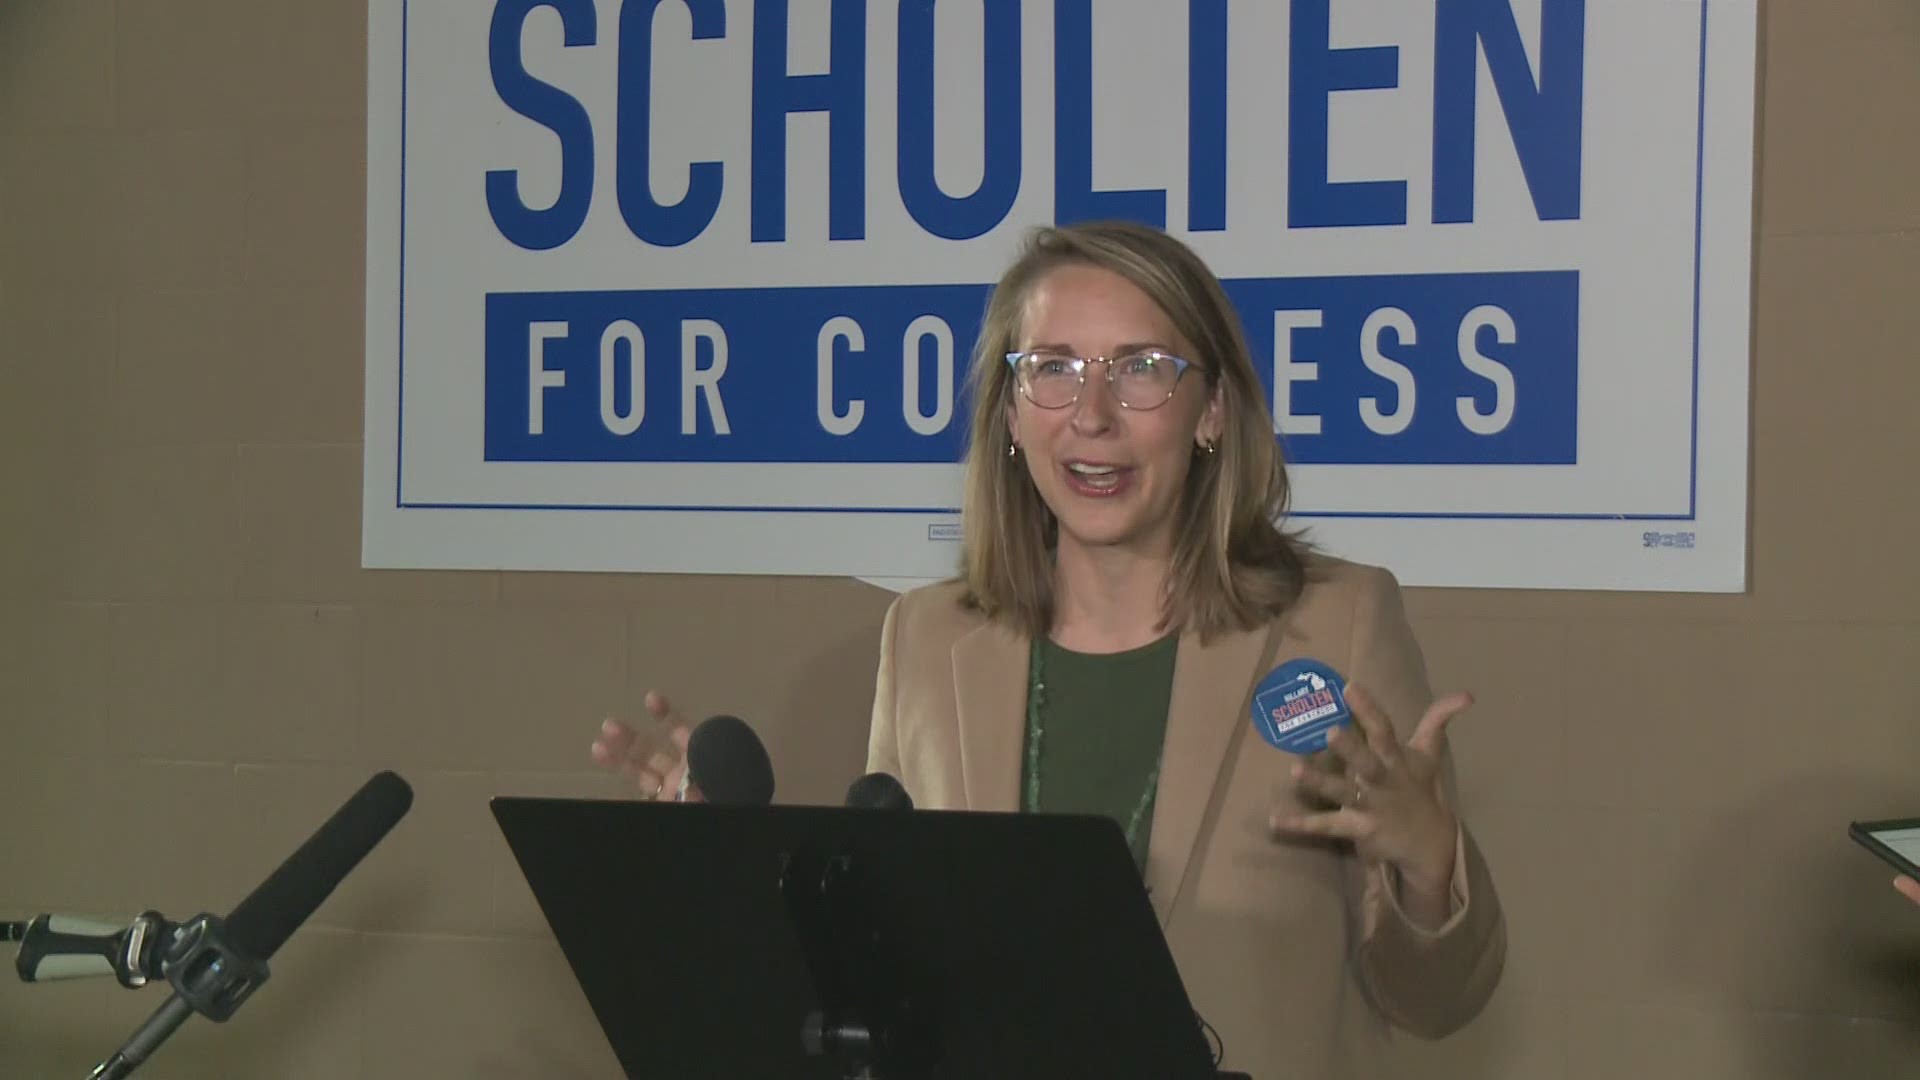 Peter Meijer and Hillary Scholten are running for congress in the 3rd District.